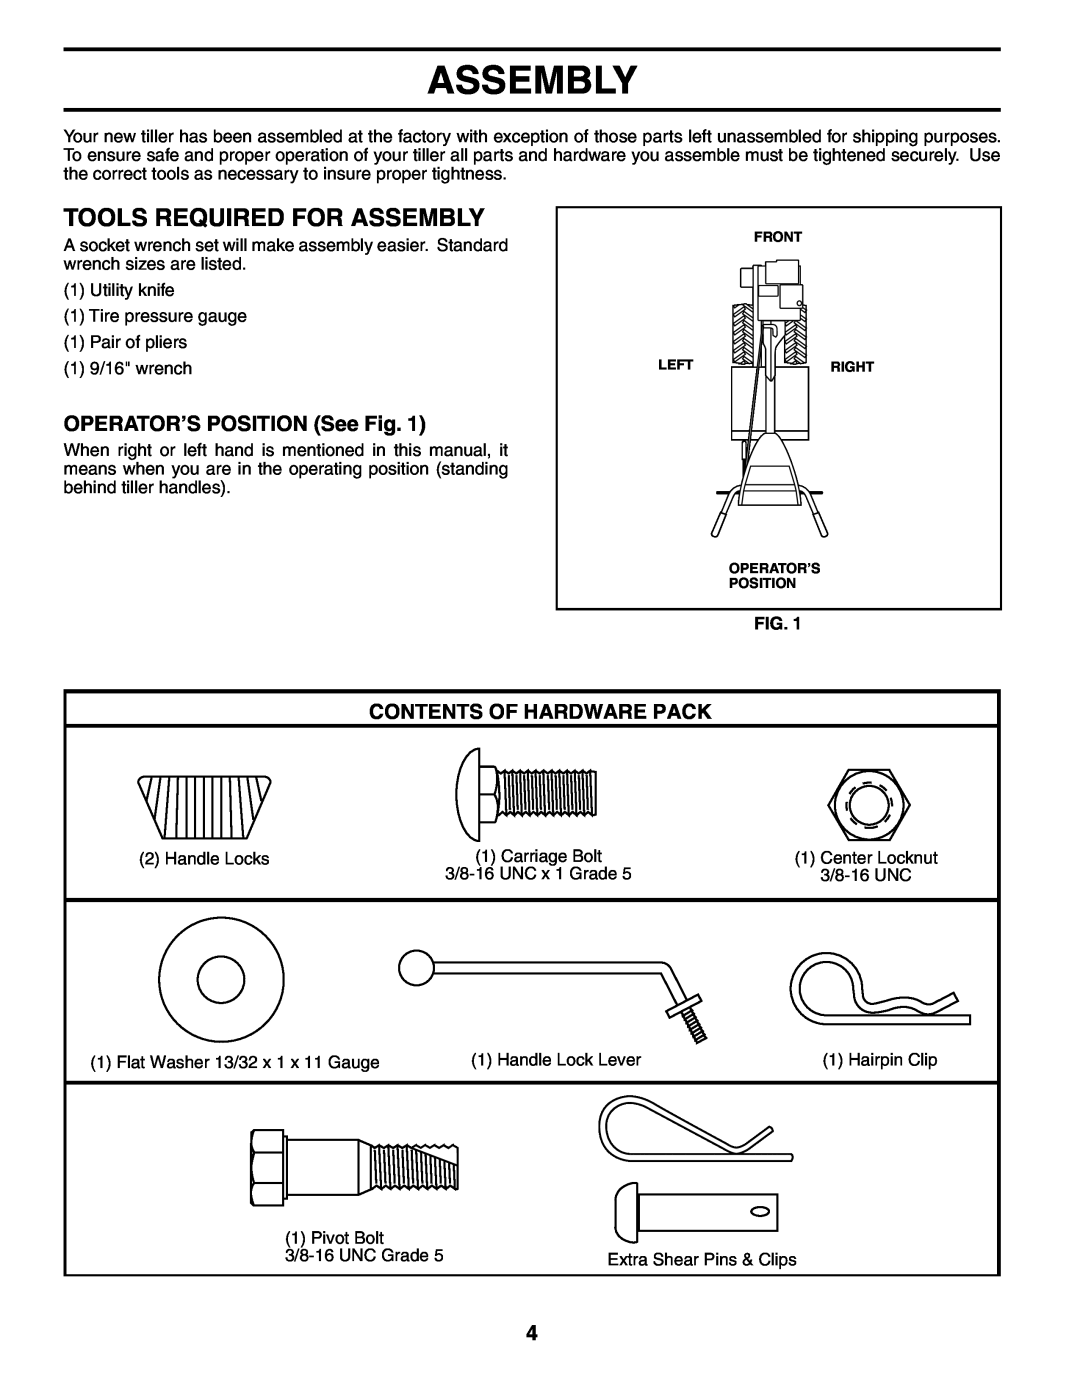 Husqvarna 650RTT owner manual Tools Required For Assembly, OPERATOR’S POSITION See Fig, Contents Of Hardware Pack 